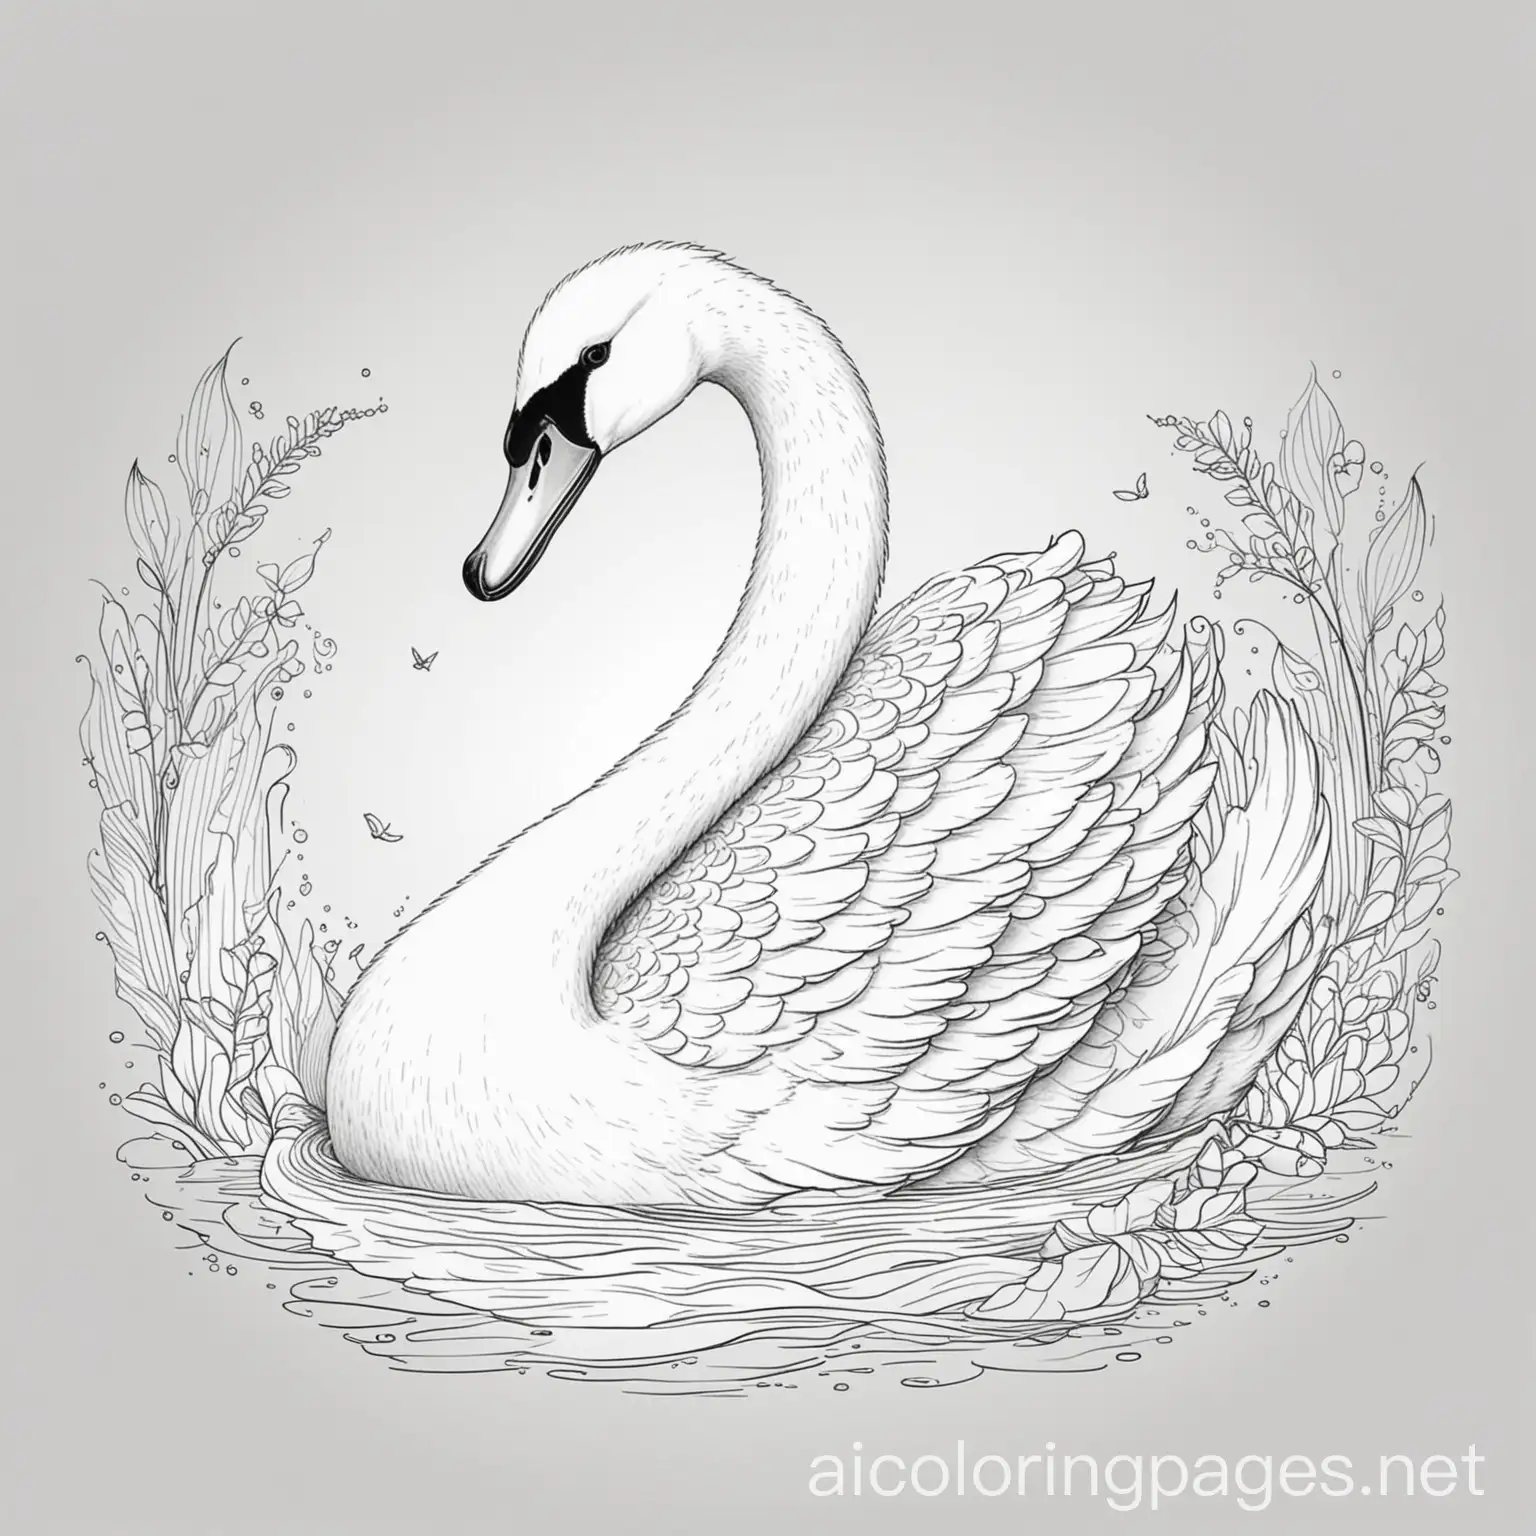 A sweet swan to color, Coloring Page, black and white, line art, white background, Simplicity, Ample White Space.